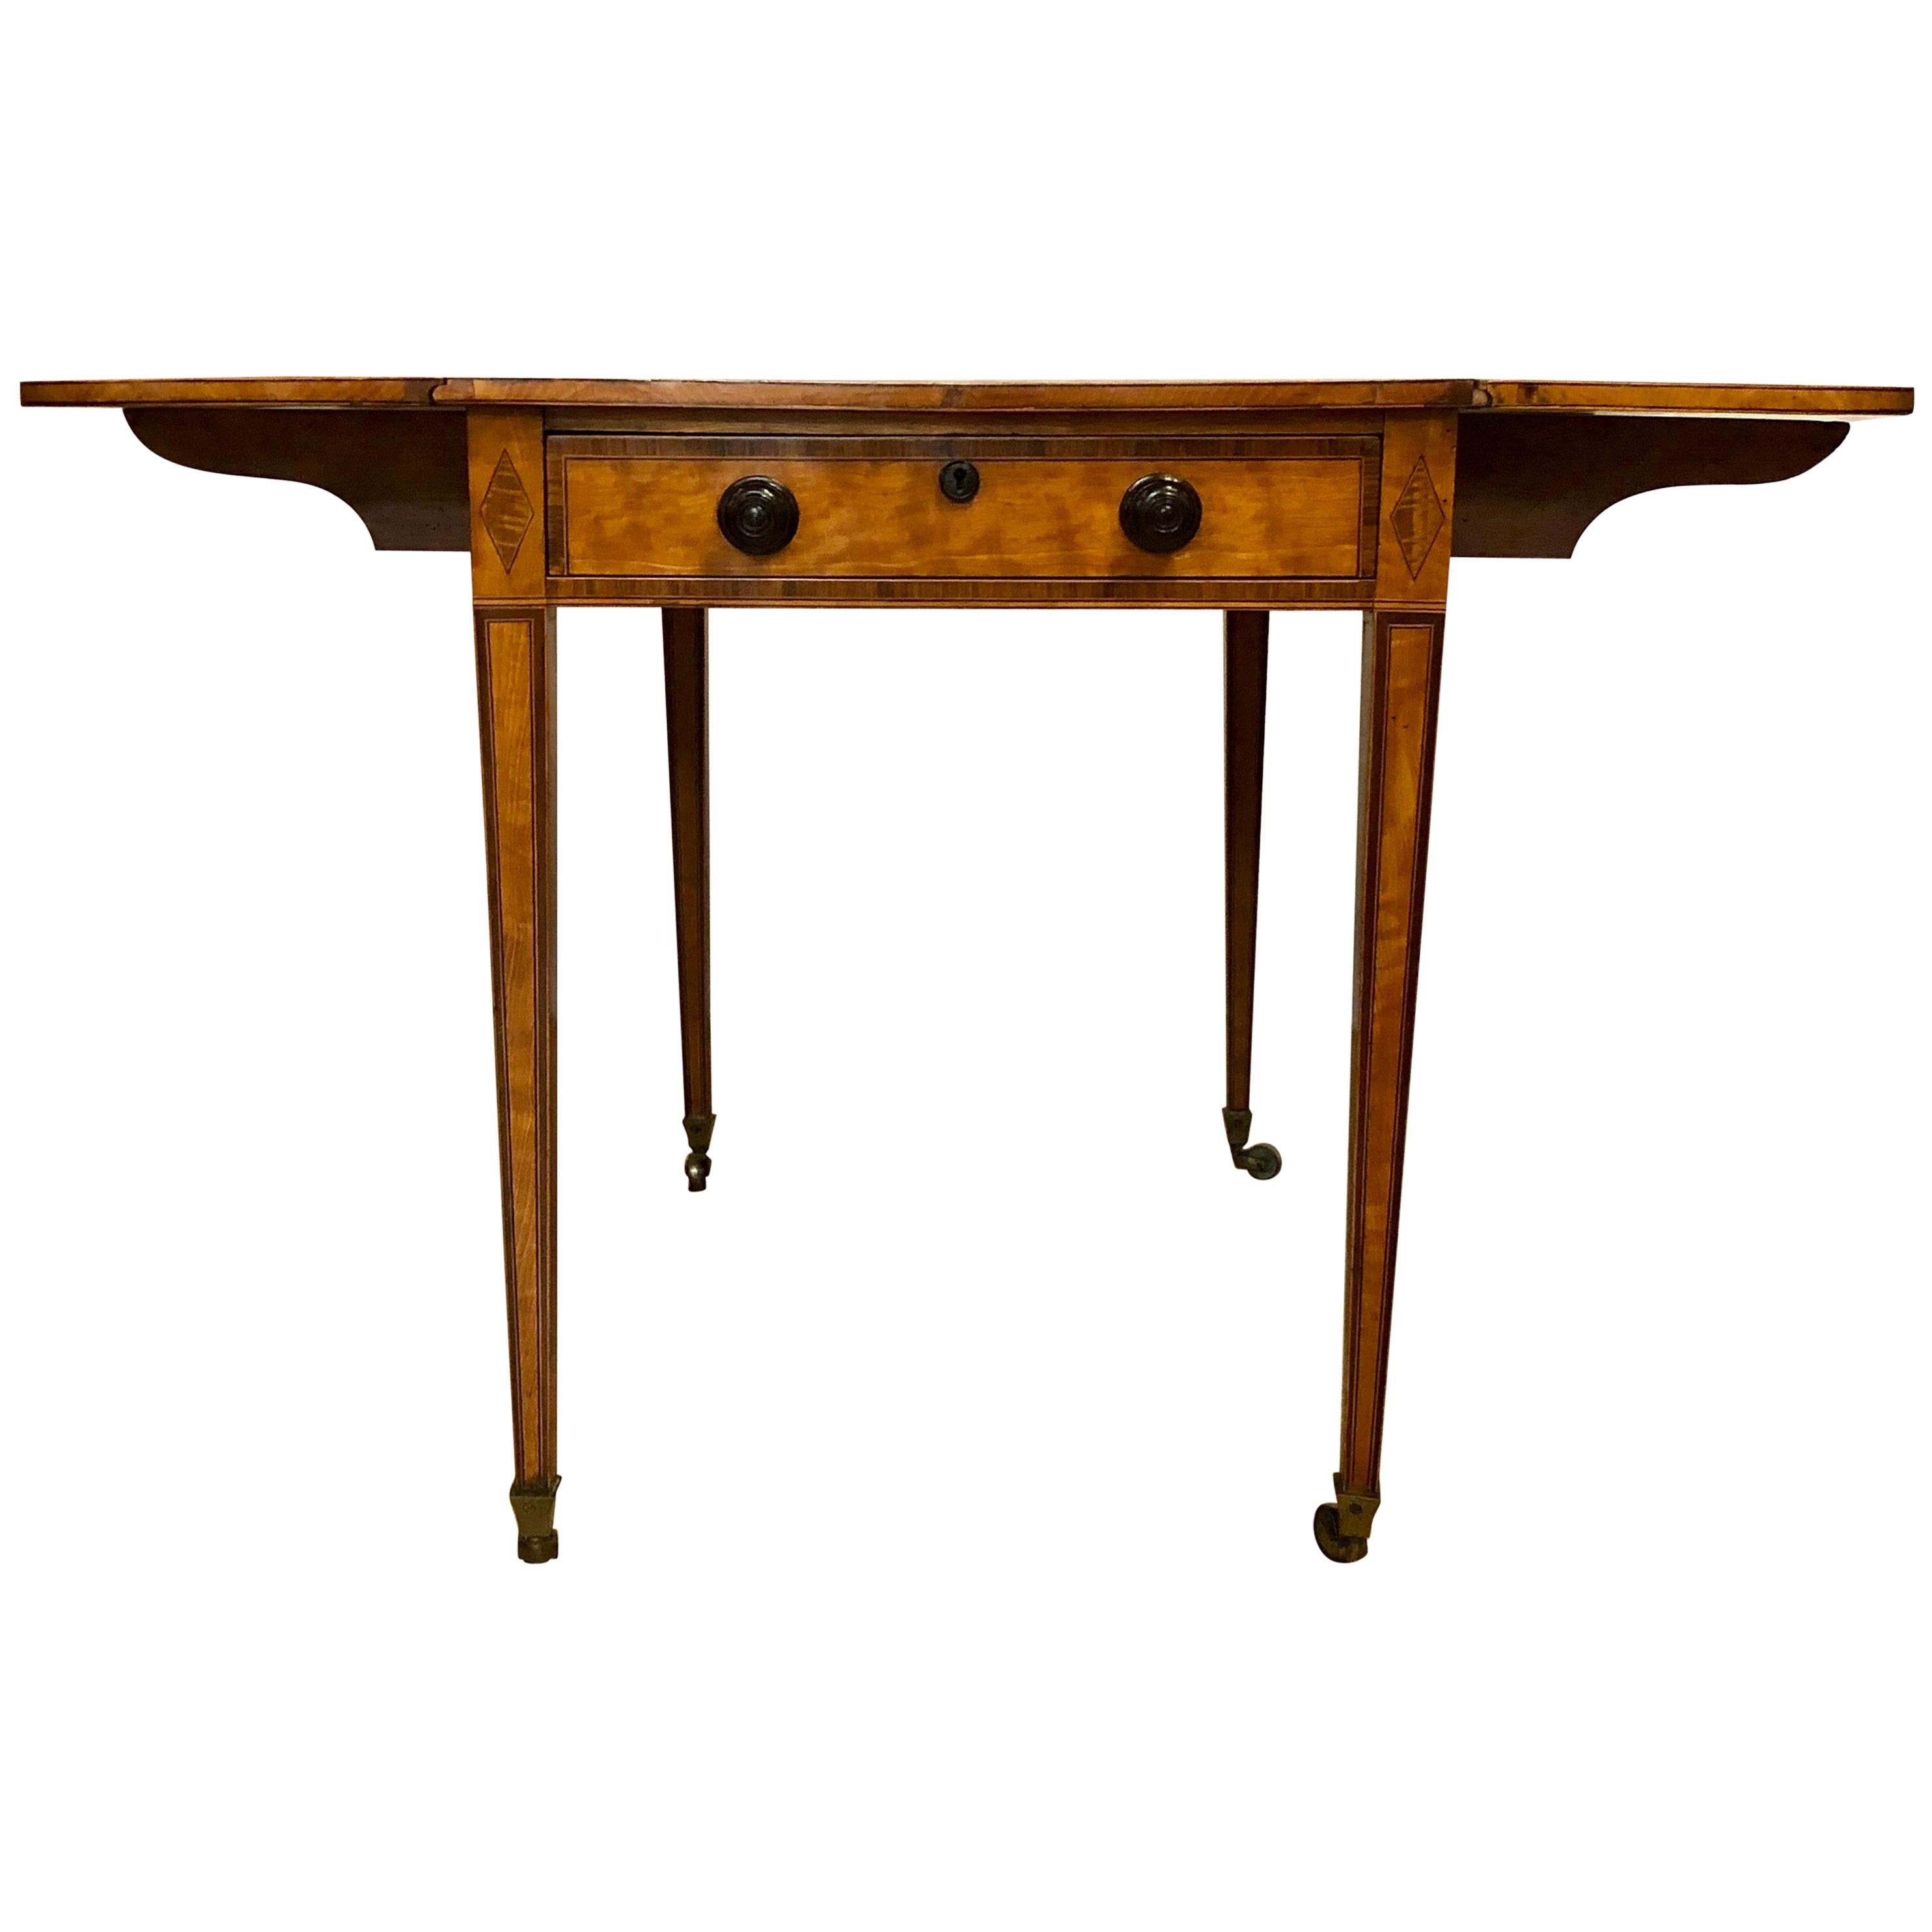 Antique English Satinwood Drop Leaf Table, circa 1810-1820 For Sale